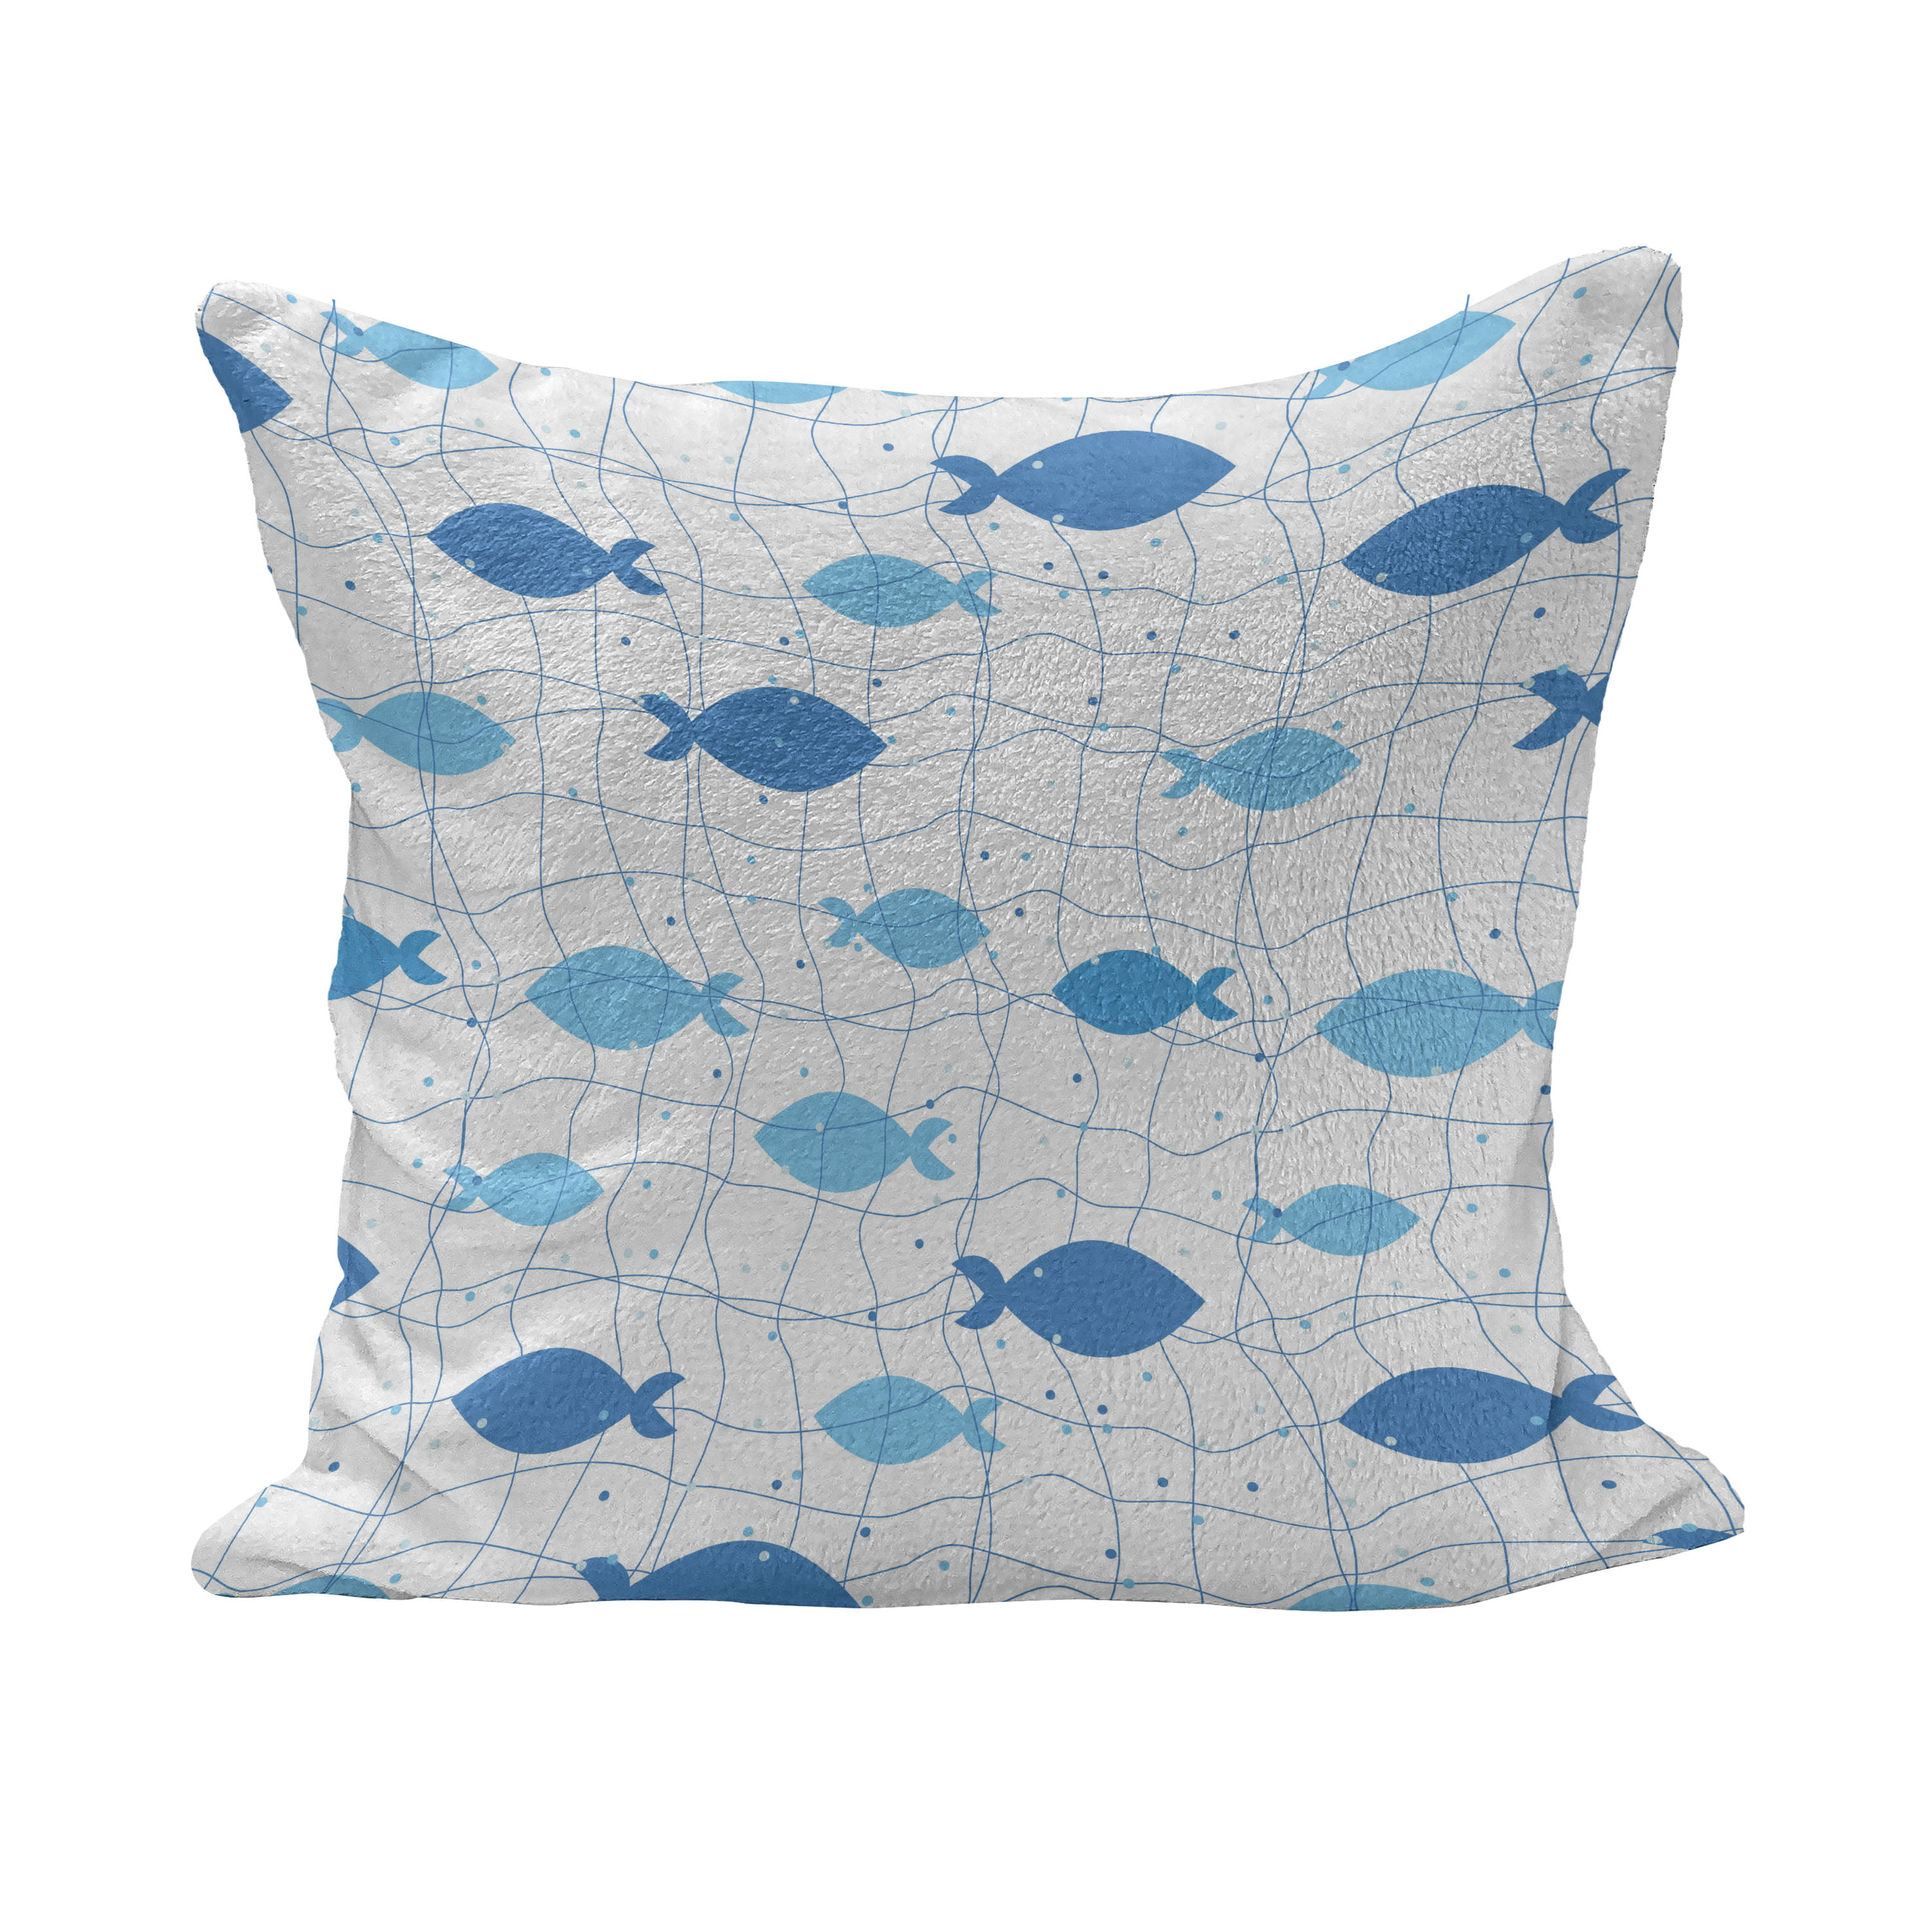 Fish Fluffy Throw Pillow Cushion Cover, Fish Net with Polka Dots Abstract  Animal Silhouettes Nature Inspired Image, Decorative Square Accent Pillow  Case, 16 x 16, Blue Pale Blue White, by Ambesonne 